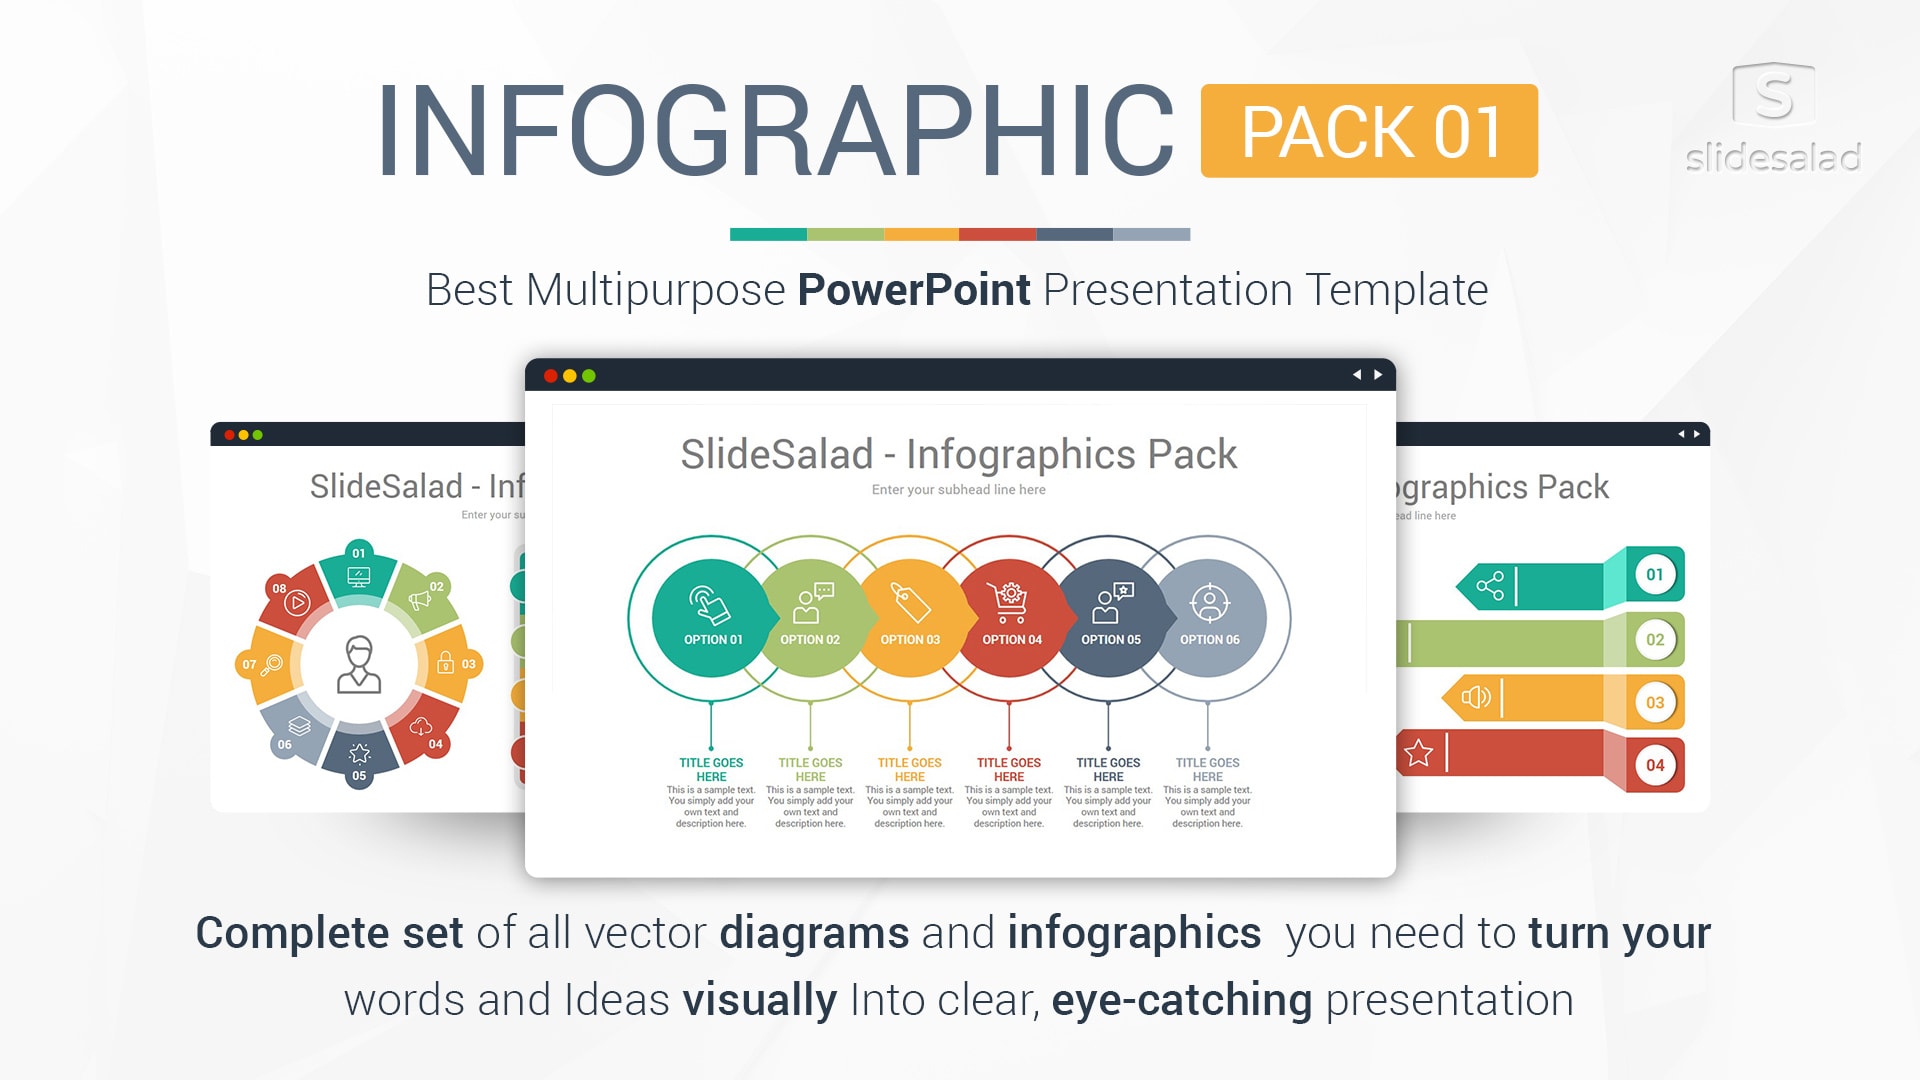 SlideSalad Infographic Designs Pack 01 PowerPoint Template for Presentations